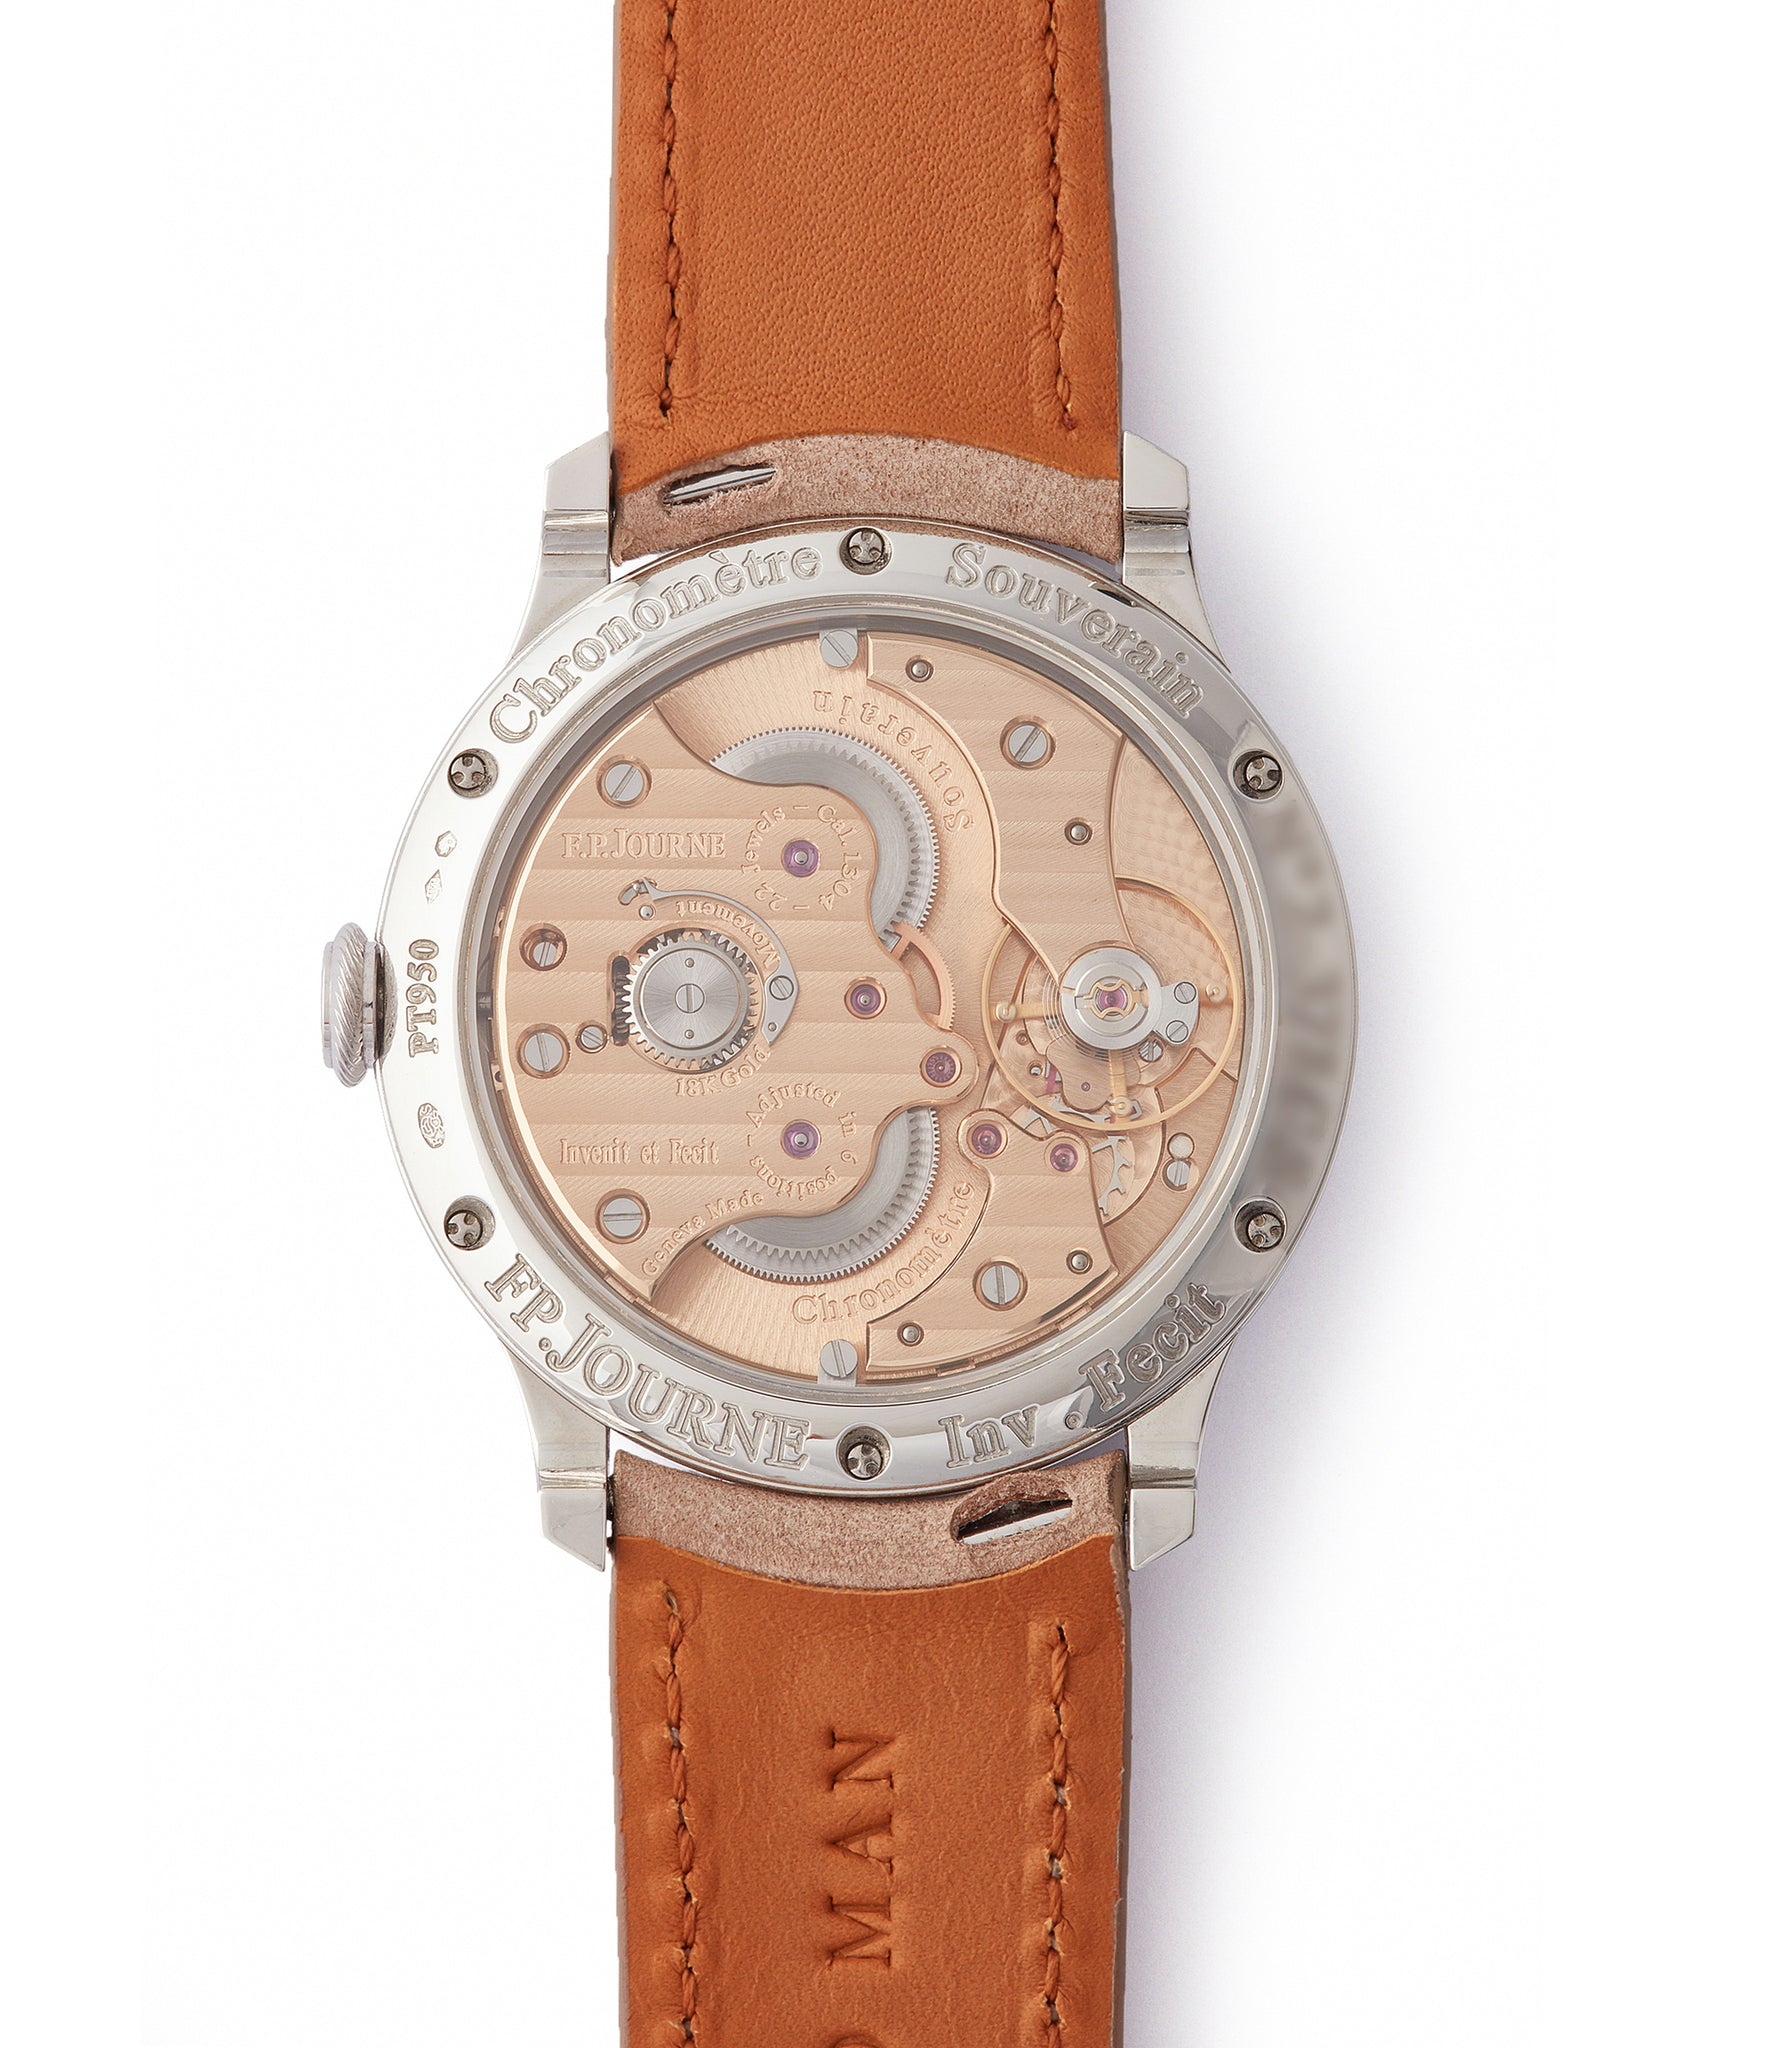 rose gold 1304 F. P. Journe Chronometre Souverain 38mm platinum silver custom dial for sale online at A Collected Man London UK specialist of independent watchmakers